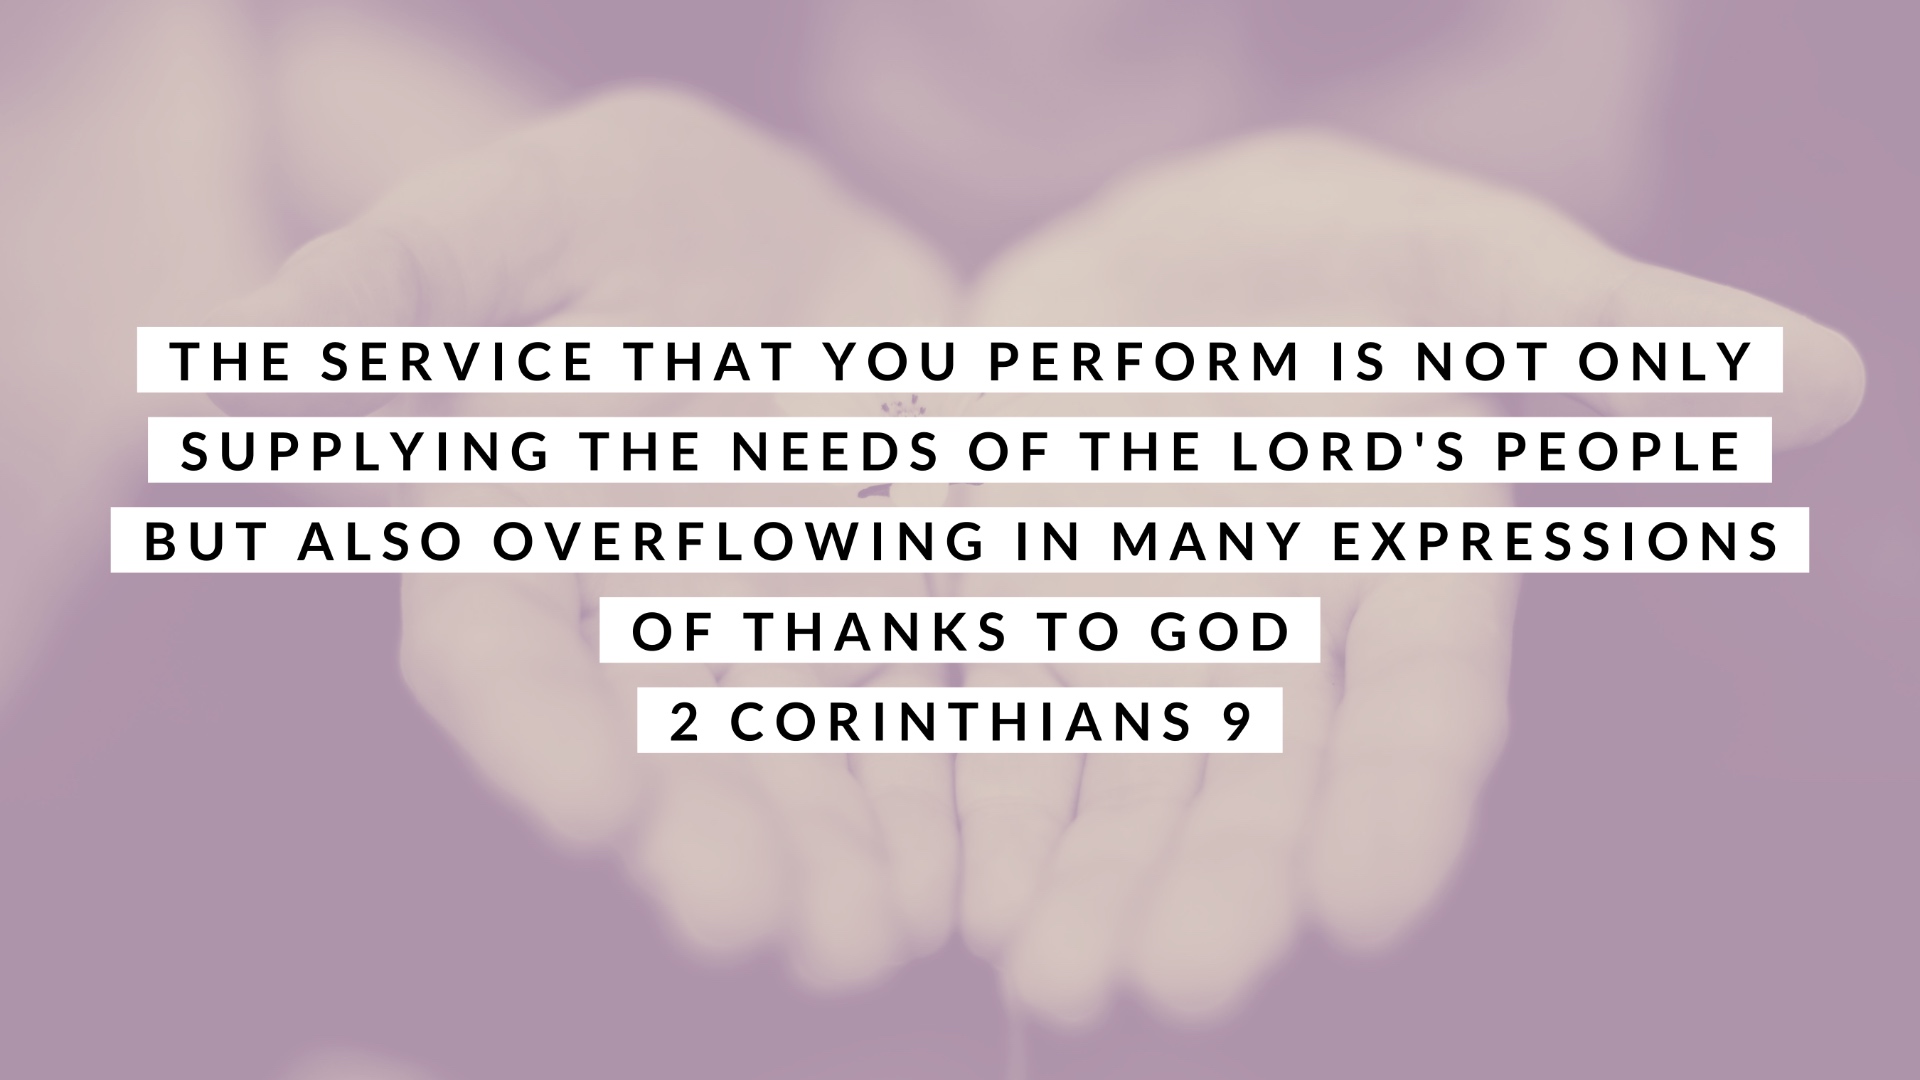 The Service that you perform is not only supplying the needs of the Lord's people but also overflowing in many expressions of thanks to God 2 Corinthians 9